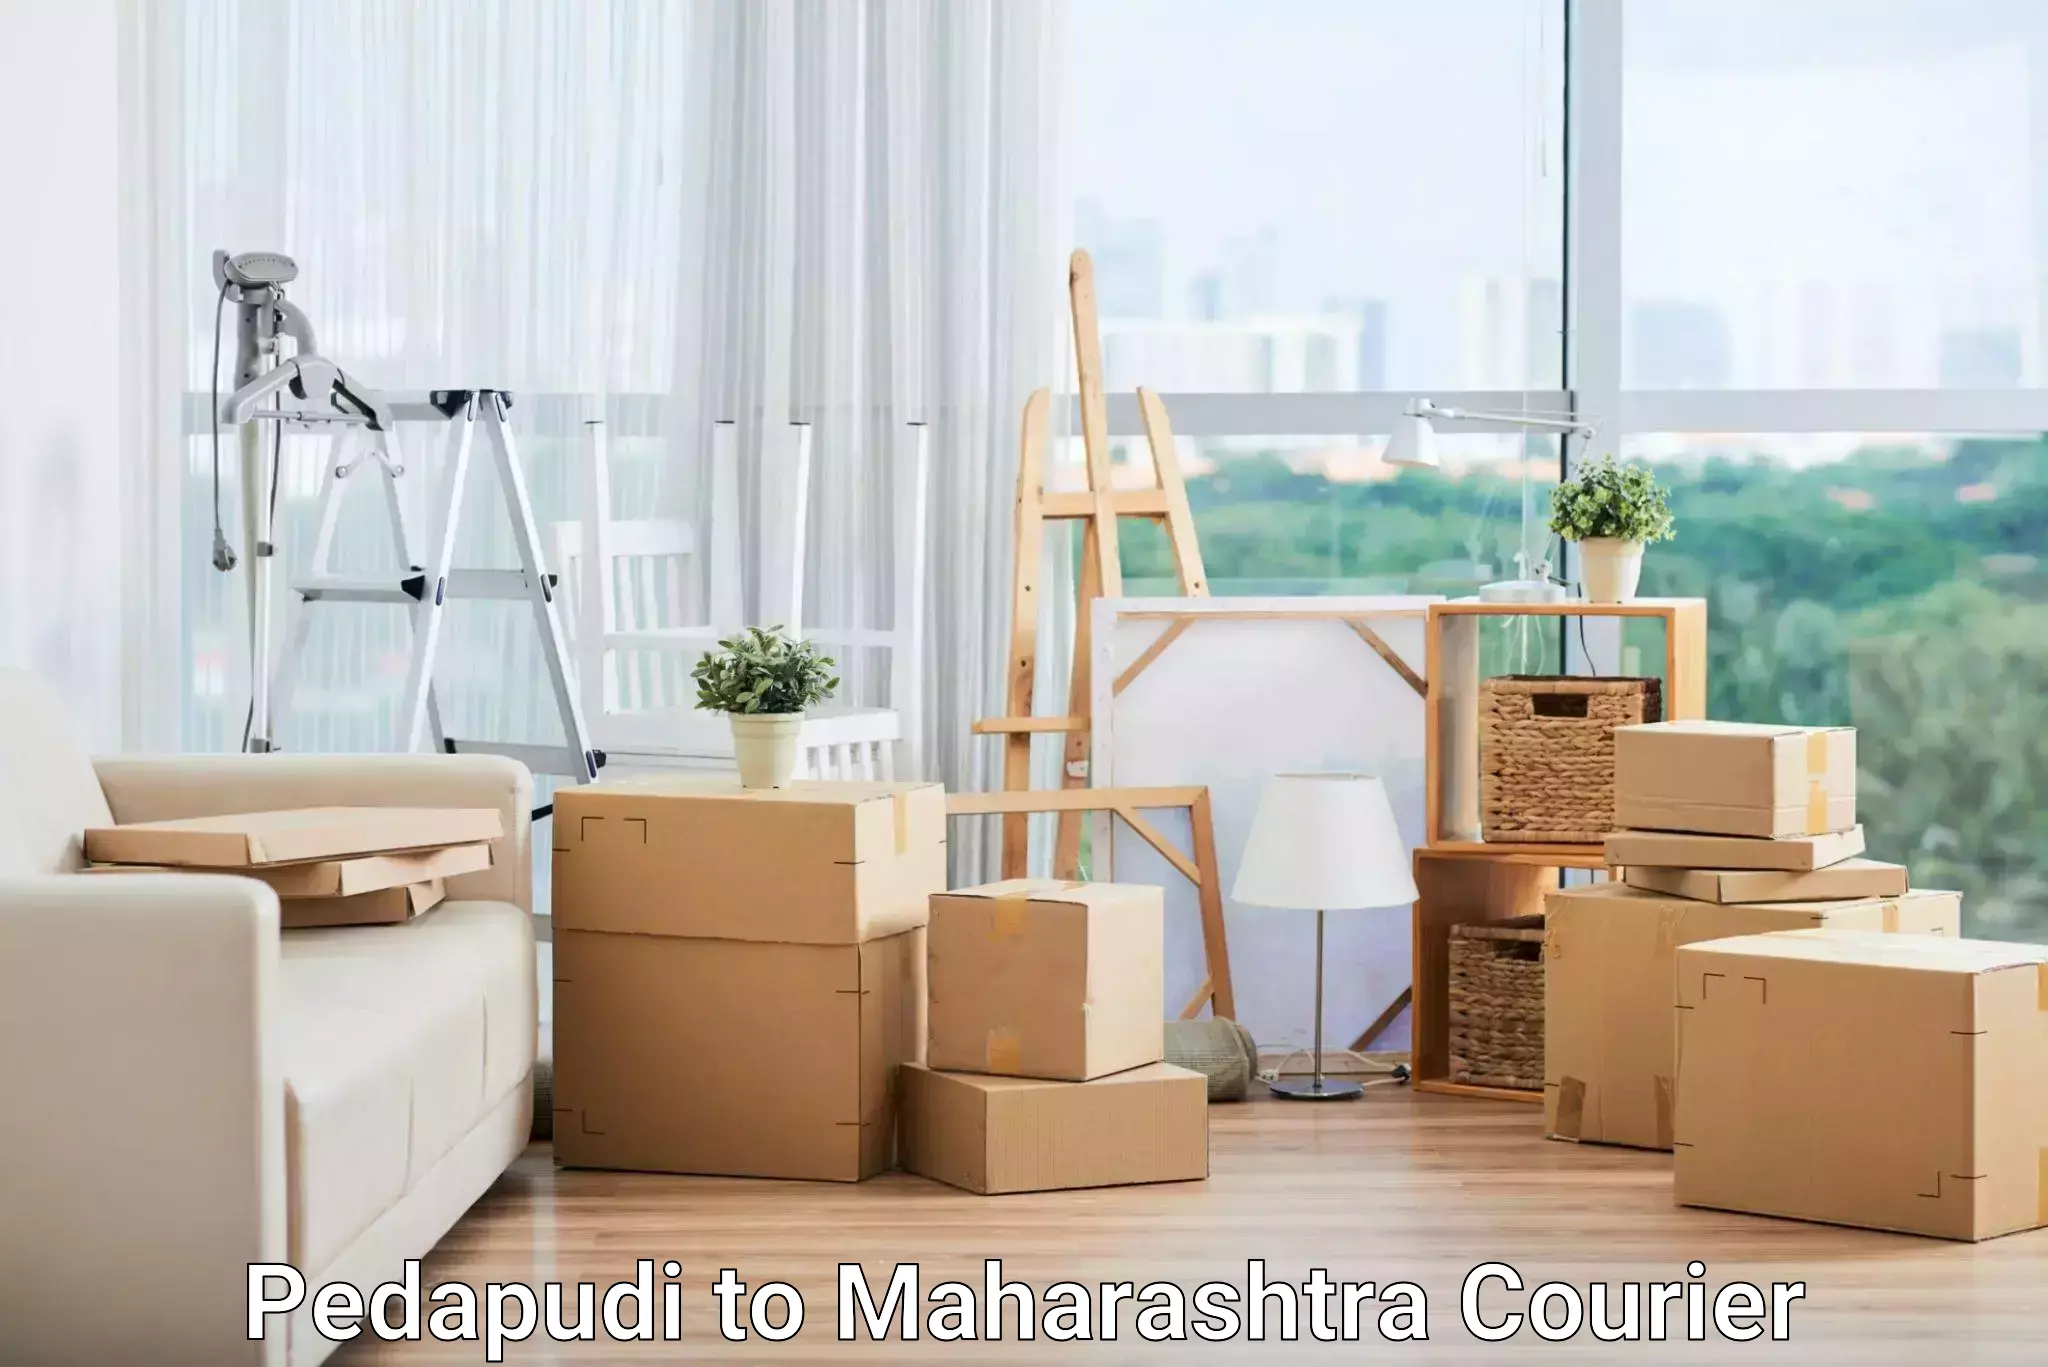 Nationwide shipping services Pedapudi to Andheri